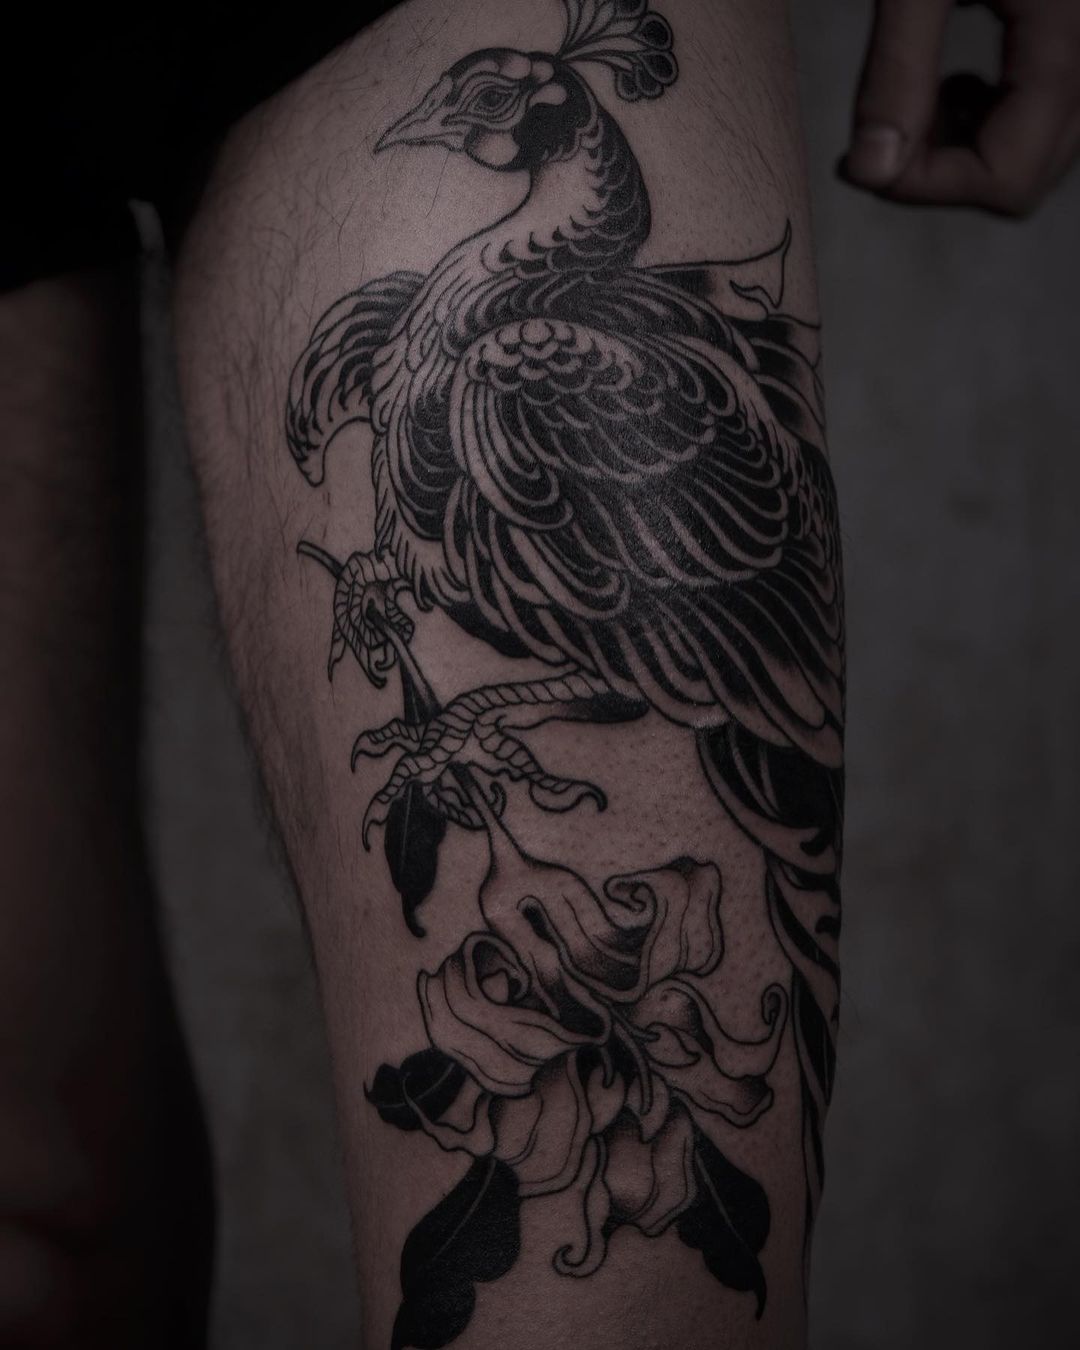 Peacock tattoo on thigh by nonne.ttt